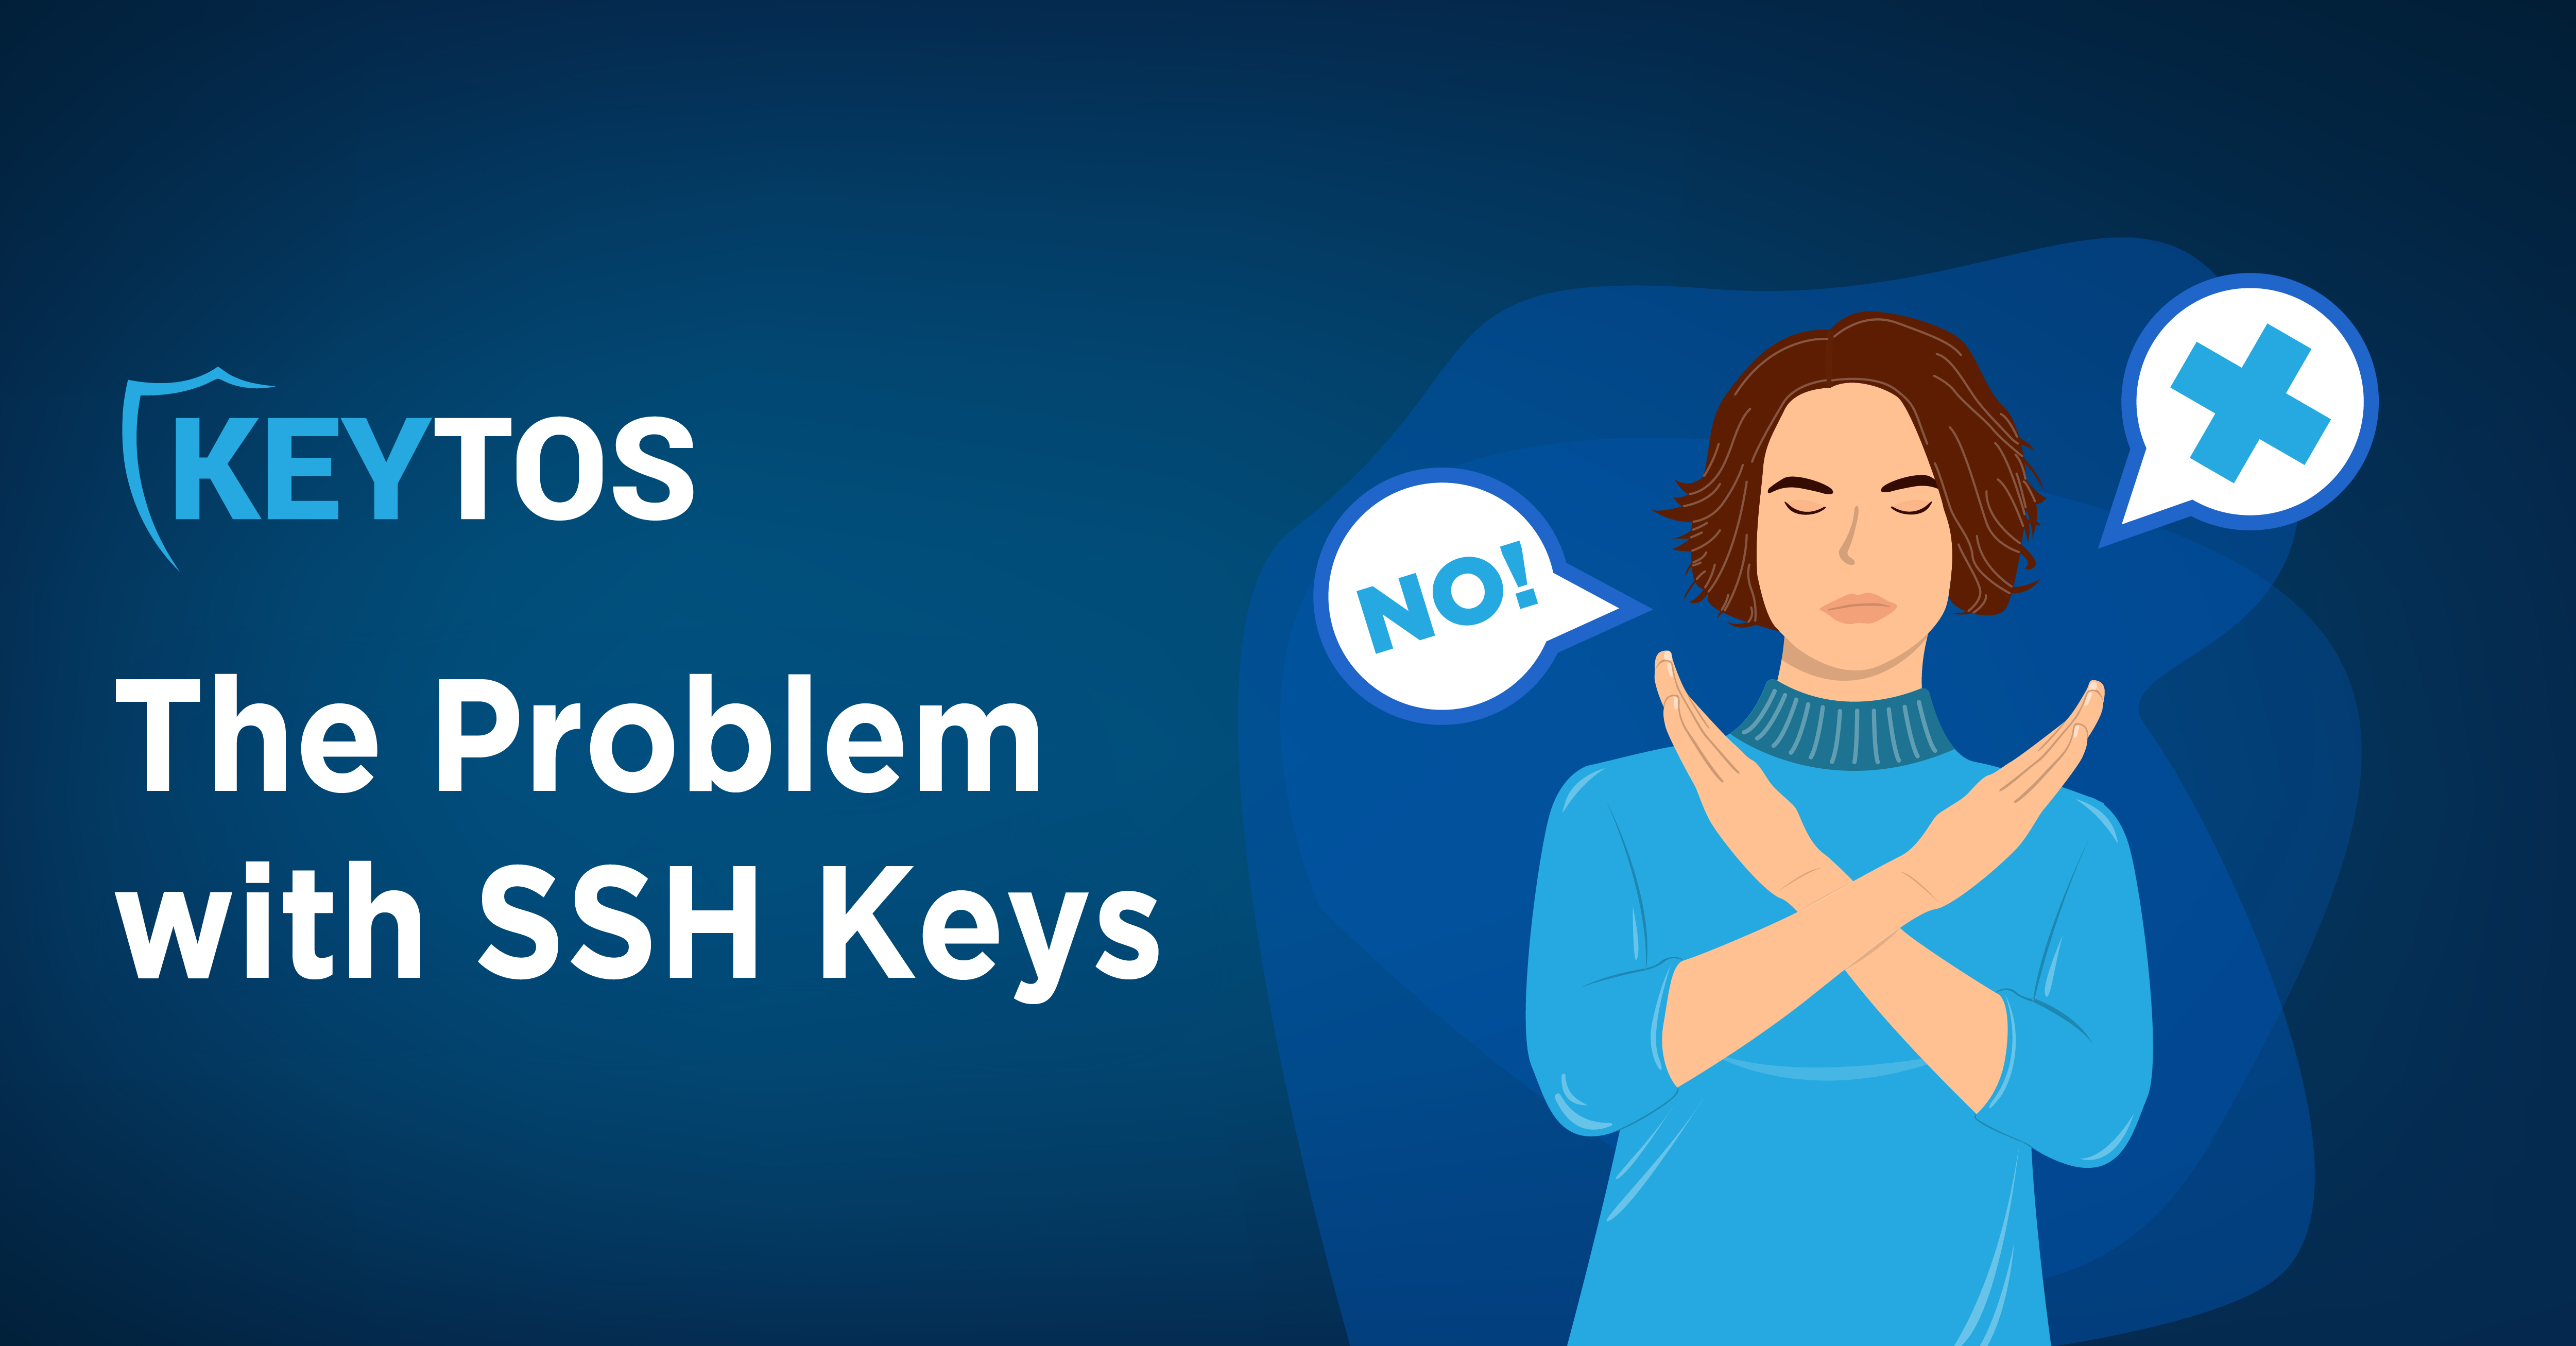 Why are SSH Keys Bad?